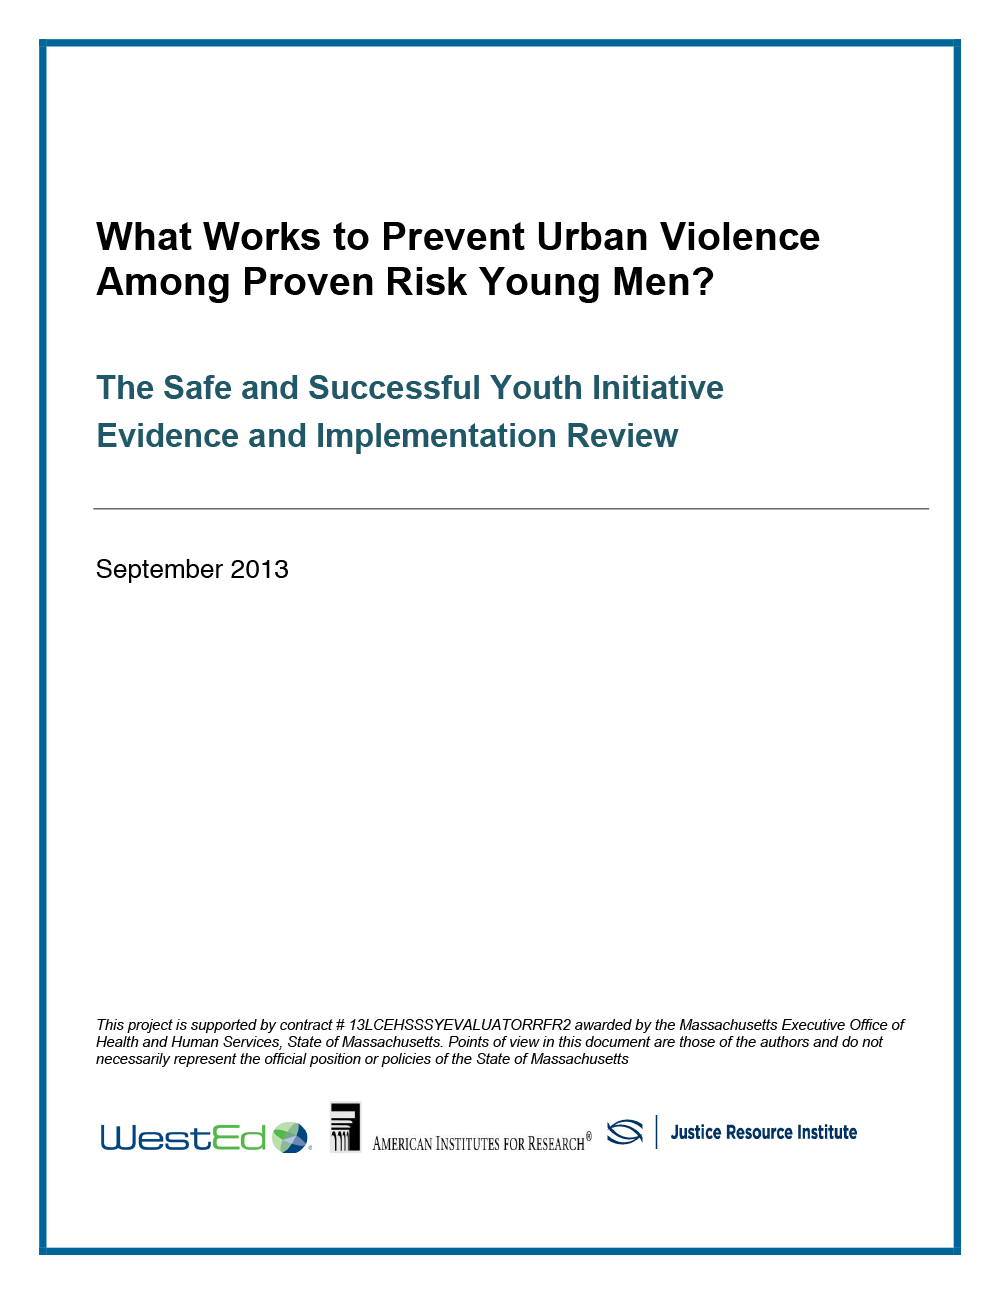 At-Risk-Youth Initiative